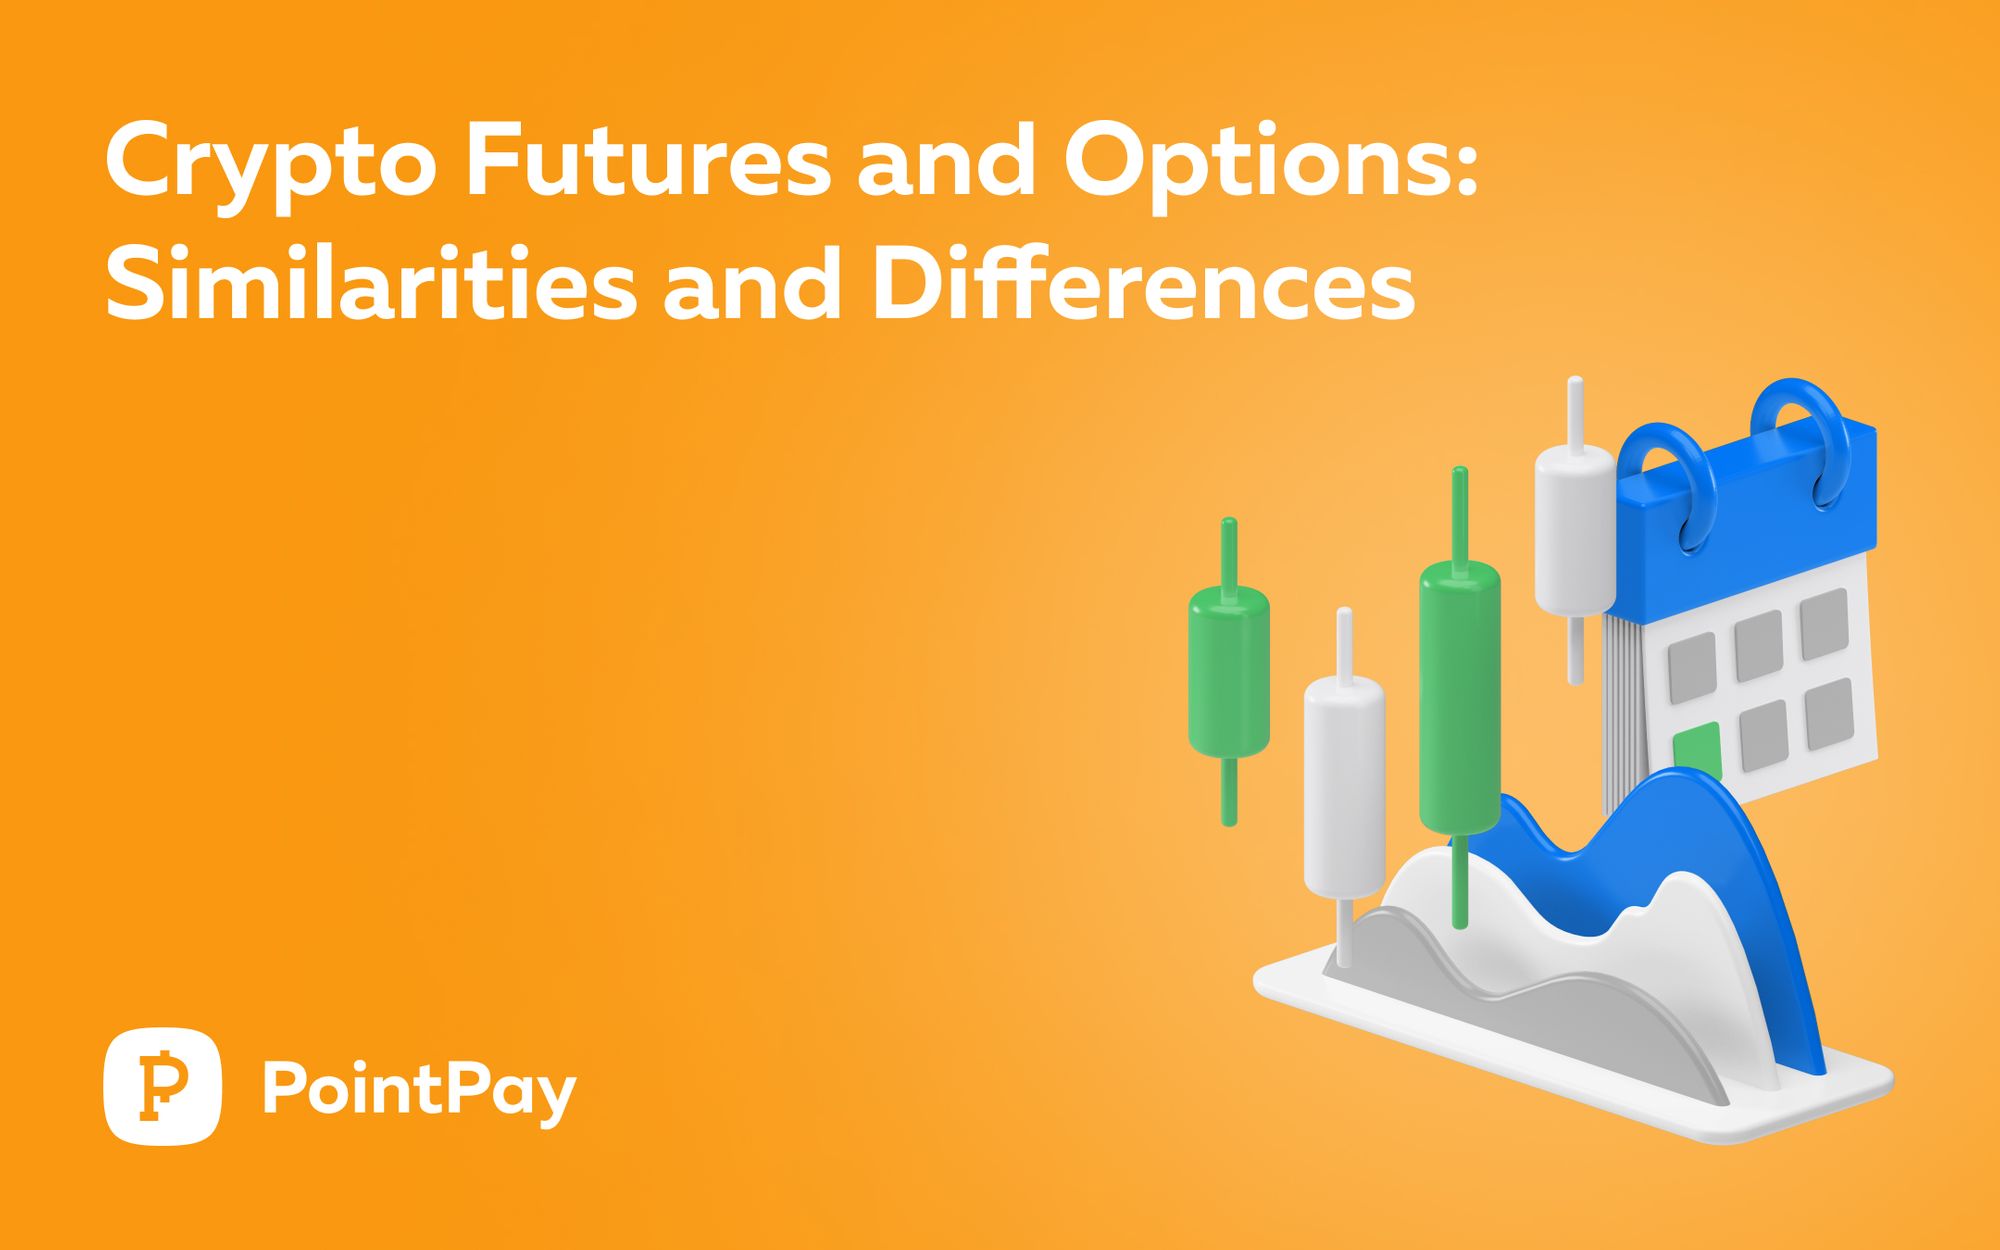 Crypto Futures and Options: What Are the Similarities and Differences